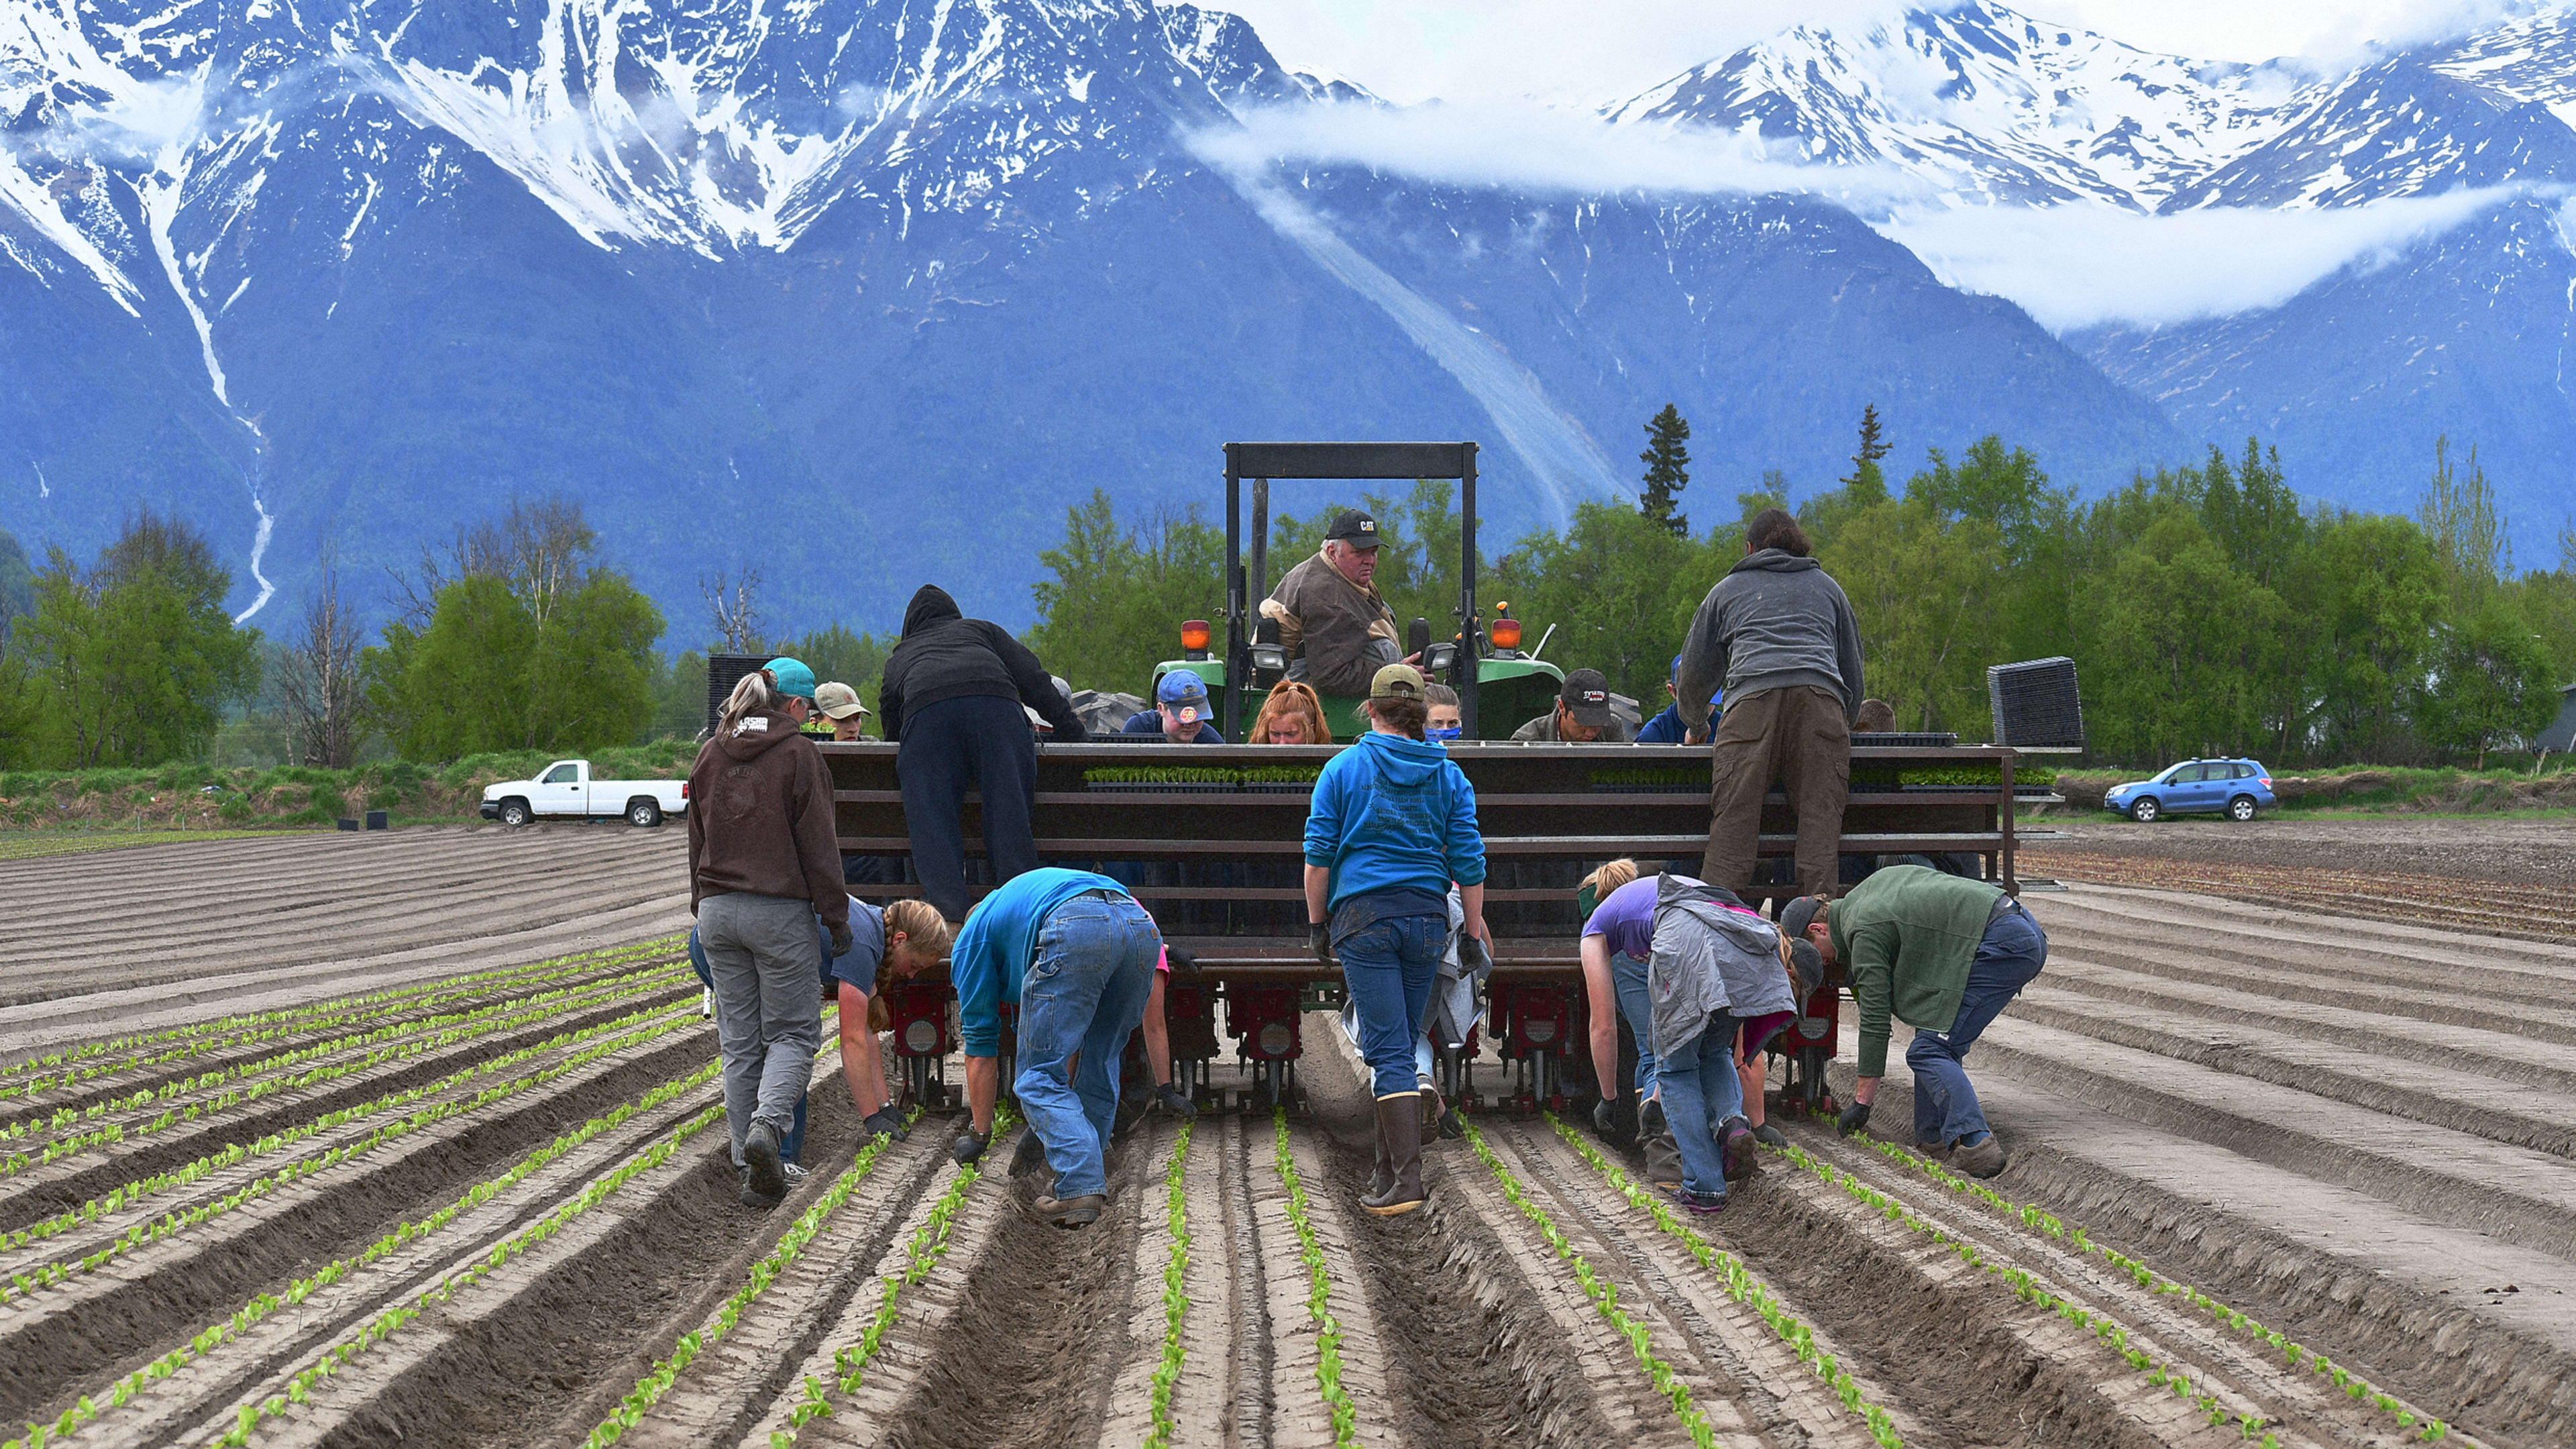 Climate change means Alaska will be able to grow more food—now is the time to start planning